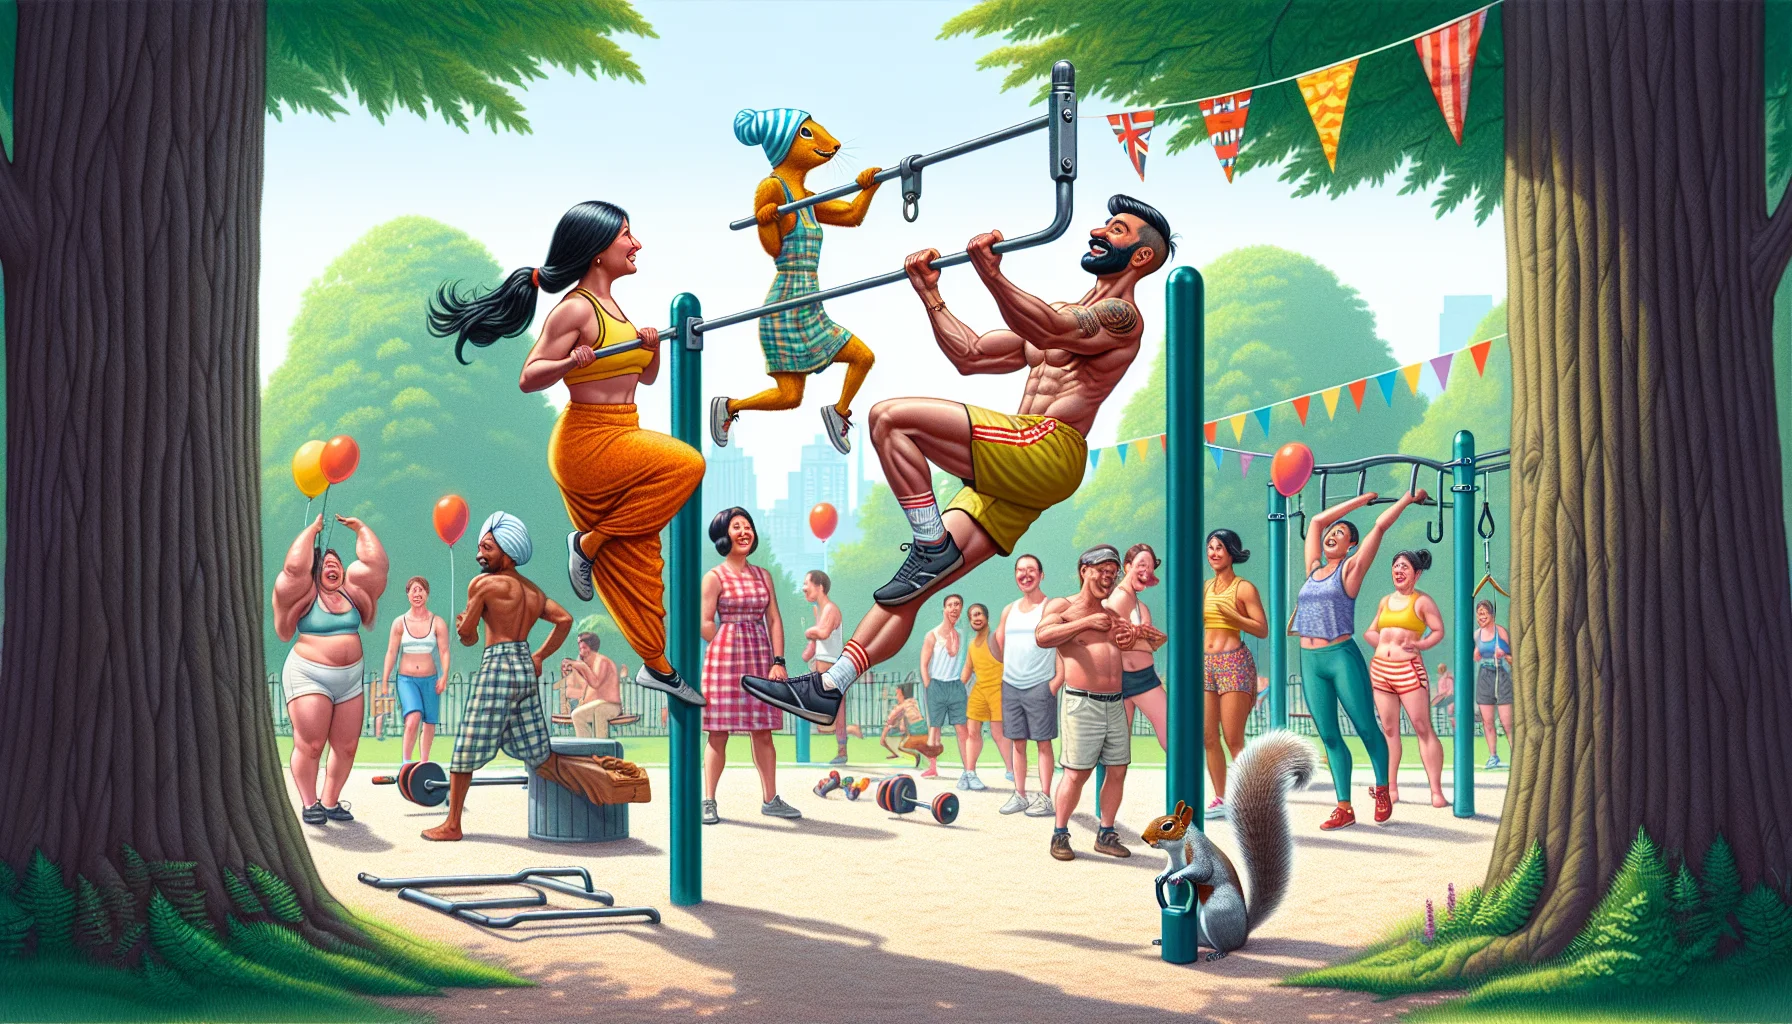 Generate a whimsical and detailed image showcasing a humorous scene set at an outdoor park. In this image, we see an energetic South Asian female and a lanky Caucasian male engaged in a calisthenics workout using a pull-up bar. Their workout attire is mismatched and comical, attracting attention from a diverse group of onlookers. Maybe a squirrel is joining in the workout, trying to do pull-ups too. Balloons and banners hang from the trees, perhaps someone attempted to create a festive gym setting. The scene instills a sense of merriment and demonstrates how exercise can be fun and accessible to all.